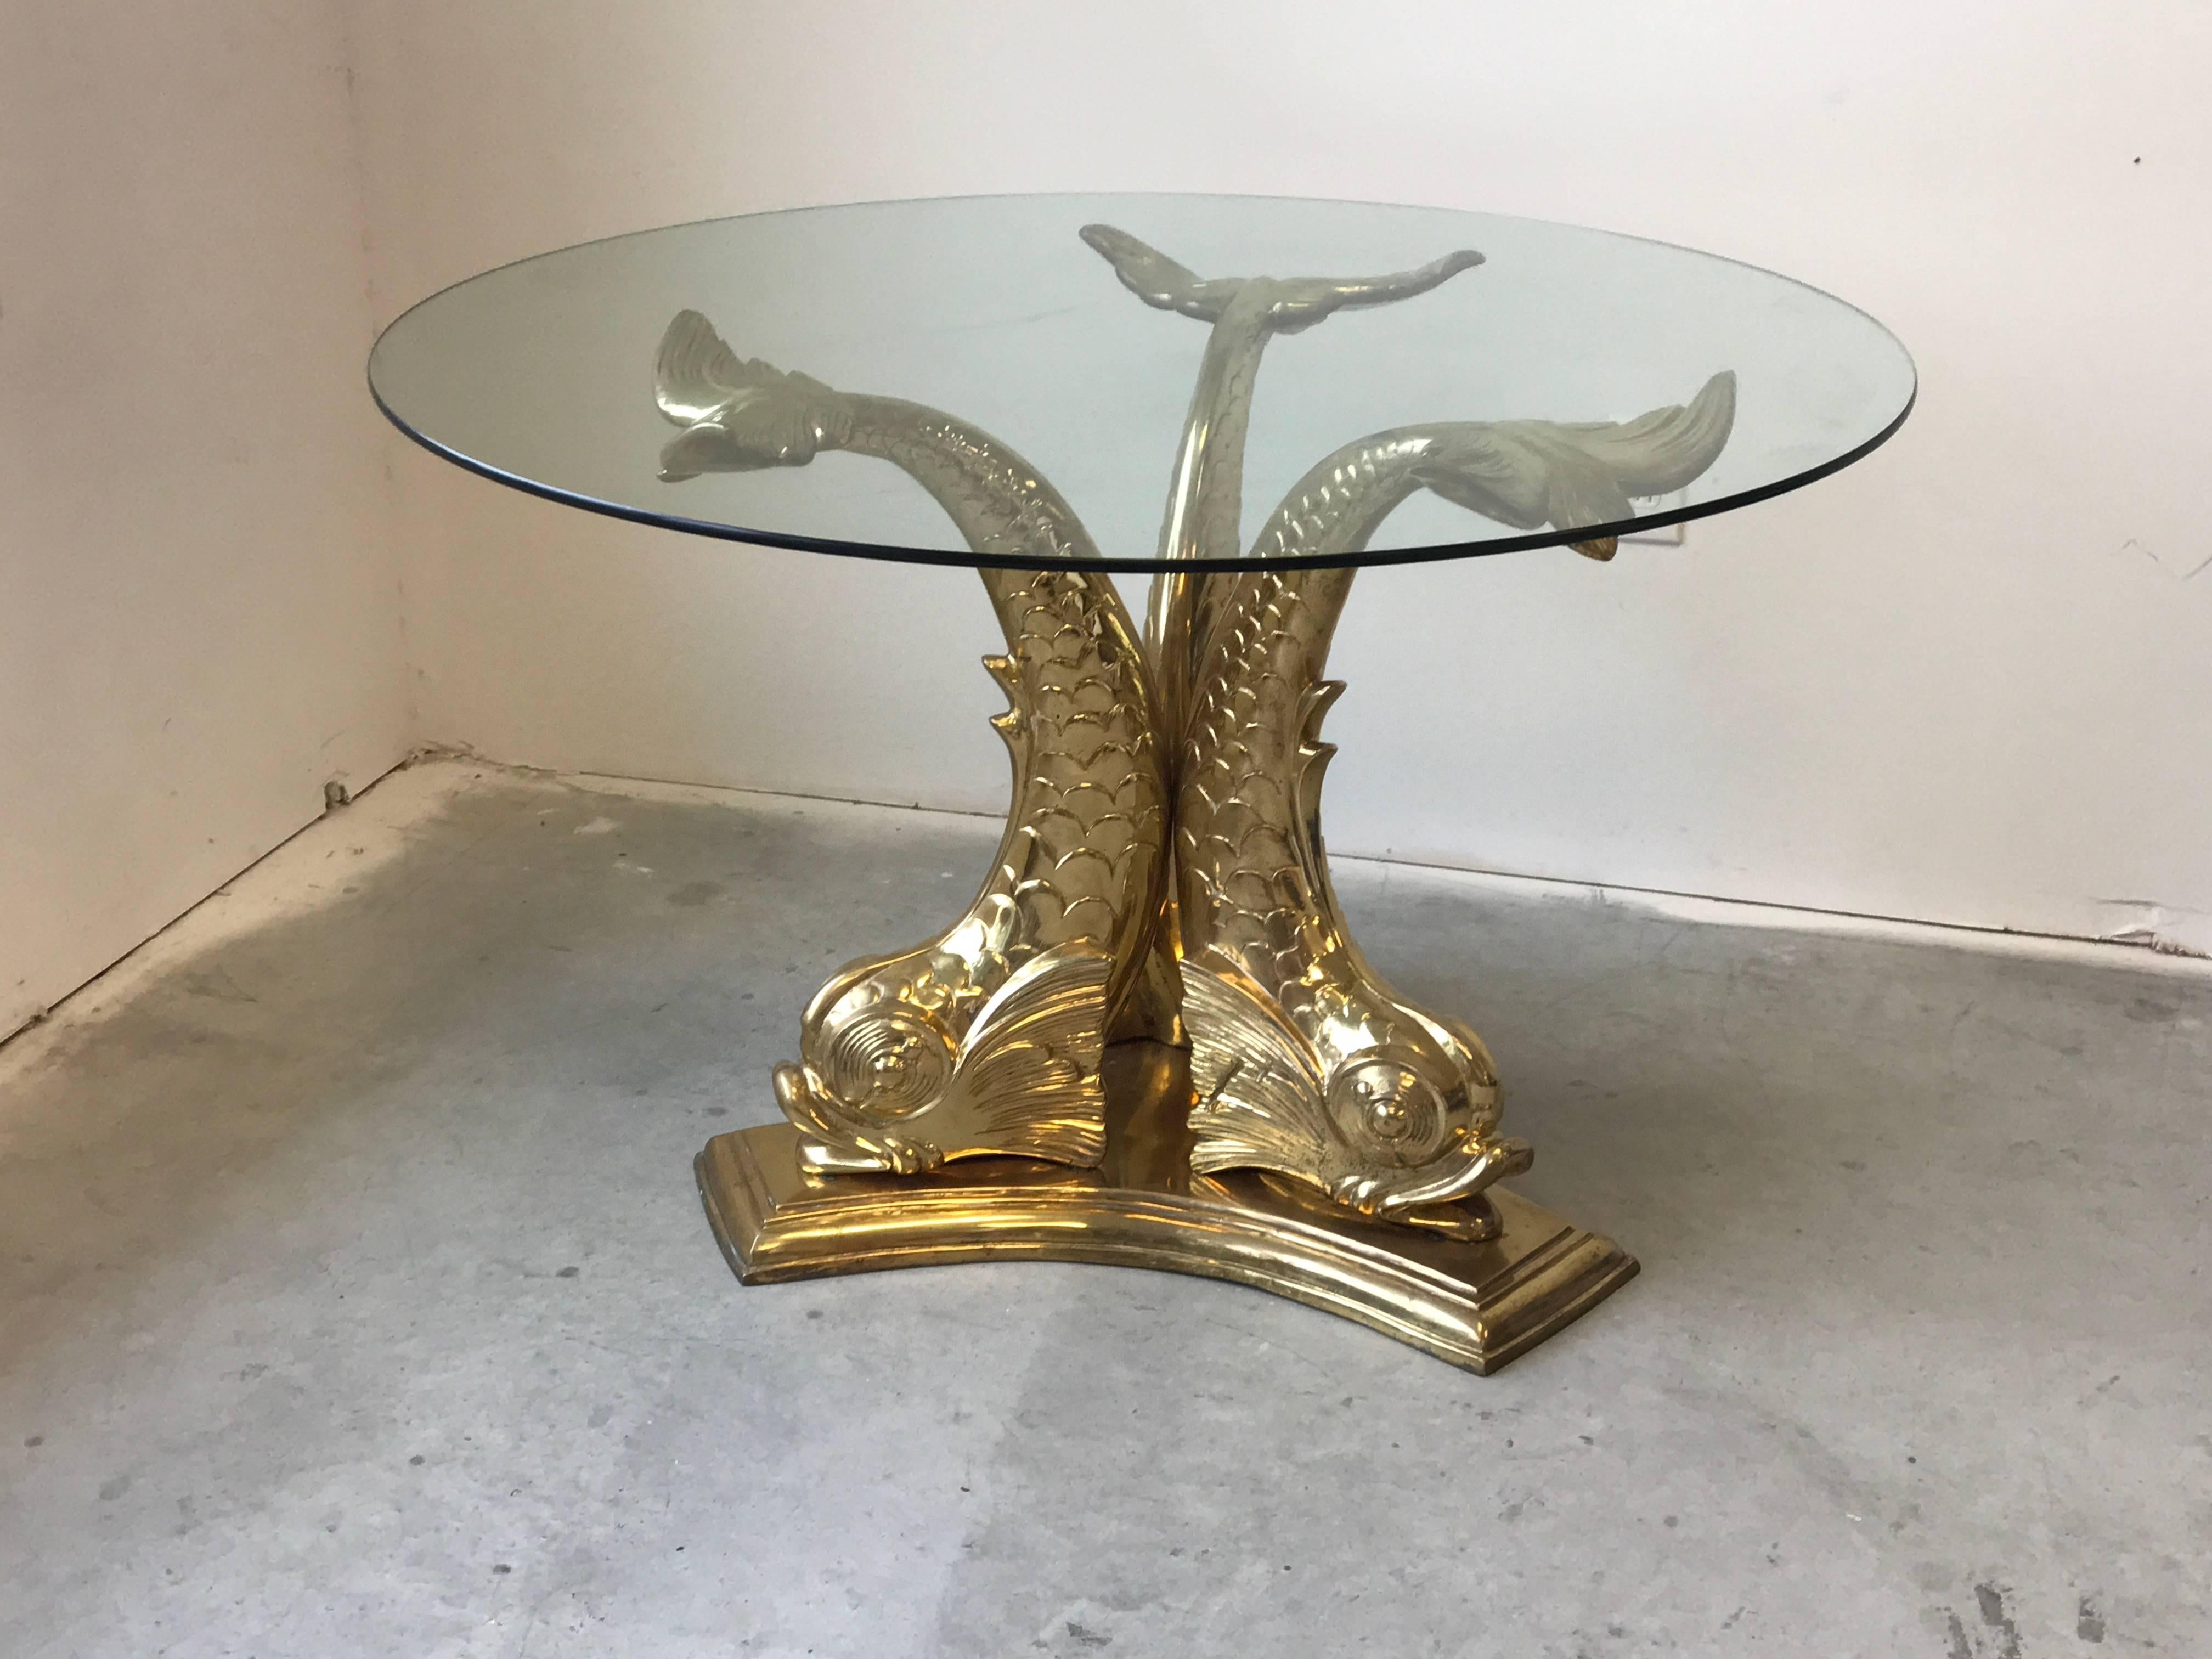 Offered is a fabulous, 1960s Italian brass koi fish dining table with glass top. The piece would make a great entry or foyer table. Can hold a minimum glass top of 36" diameter.